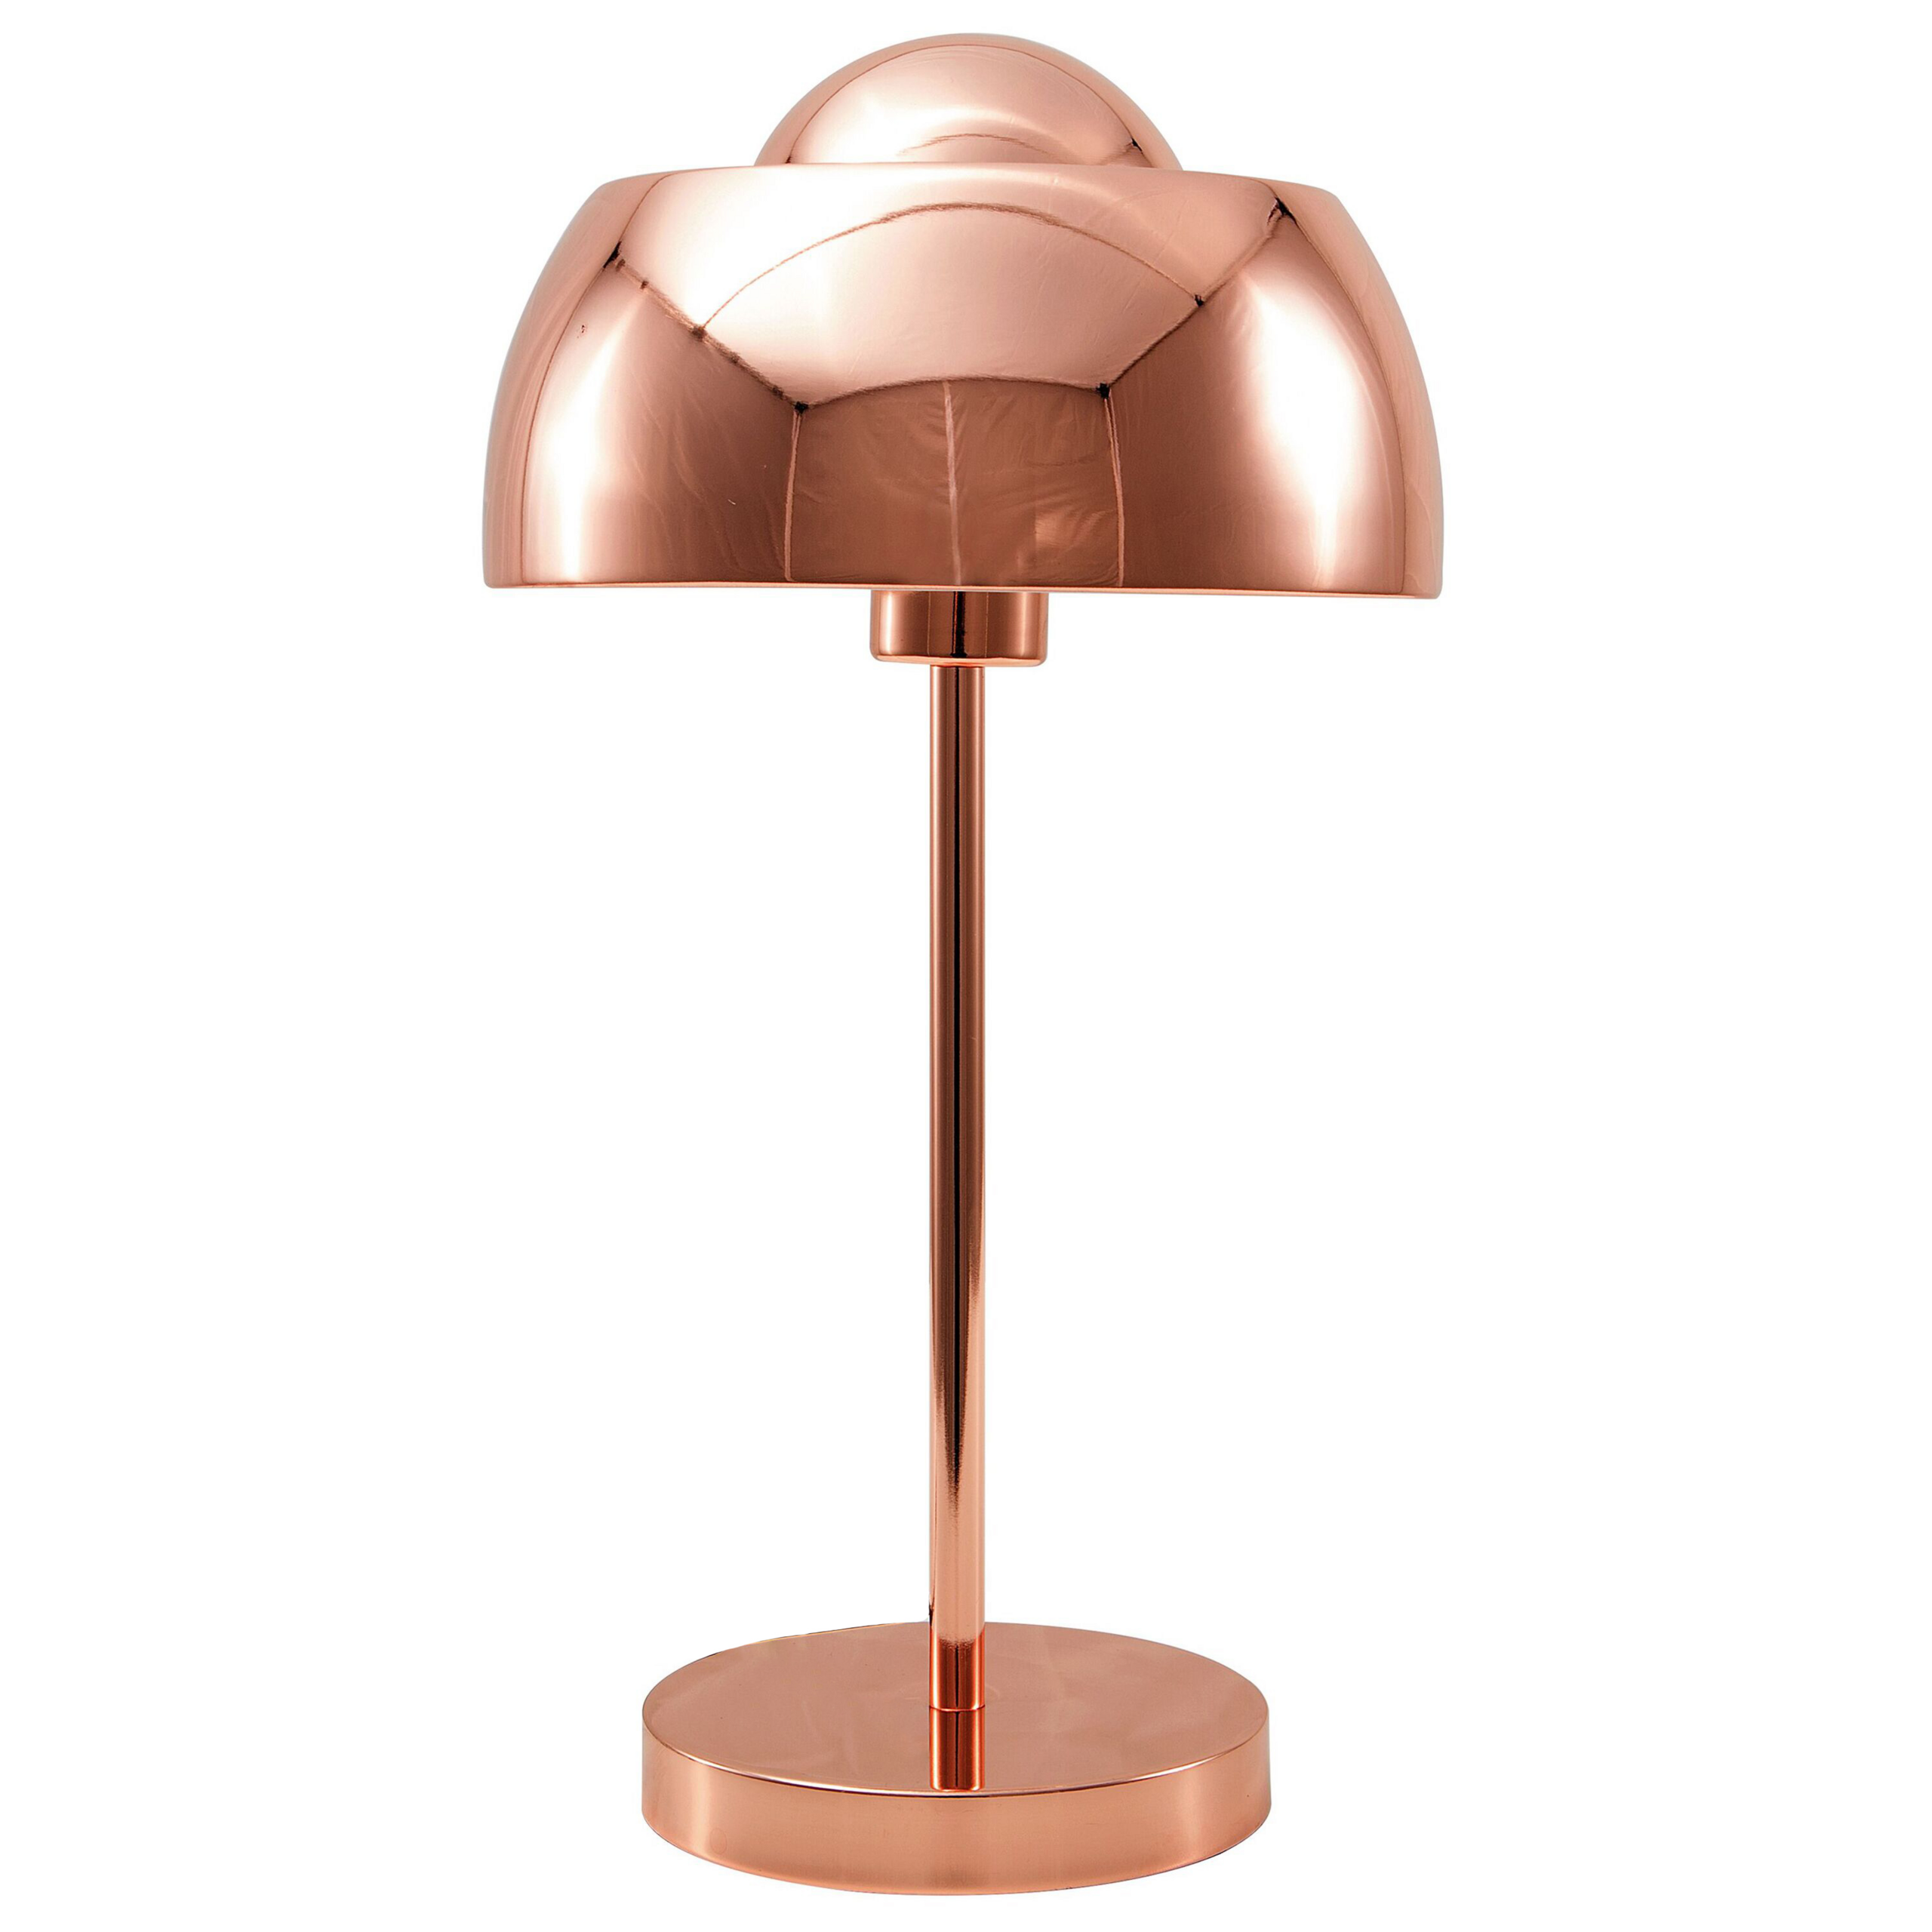 Beliani Table Lamp Bedside Light Copper Metal Round Base Dome Shade Industrial